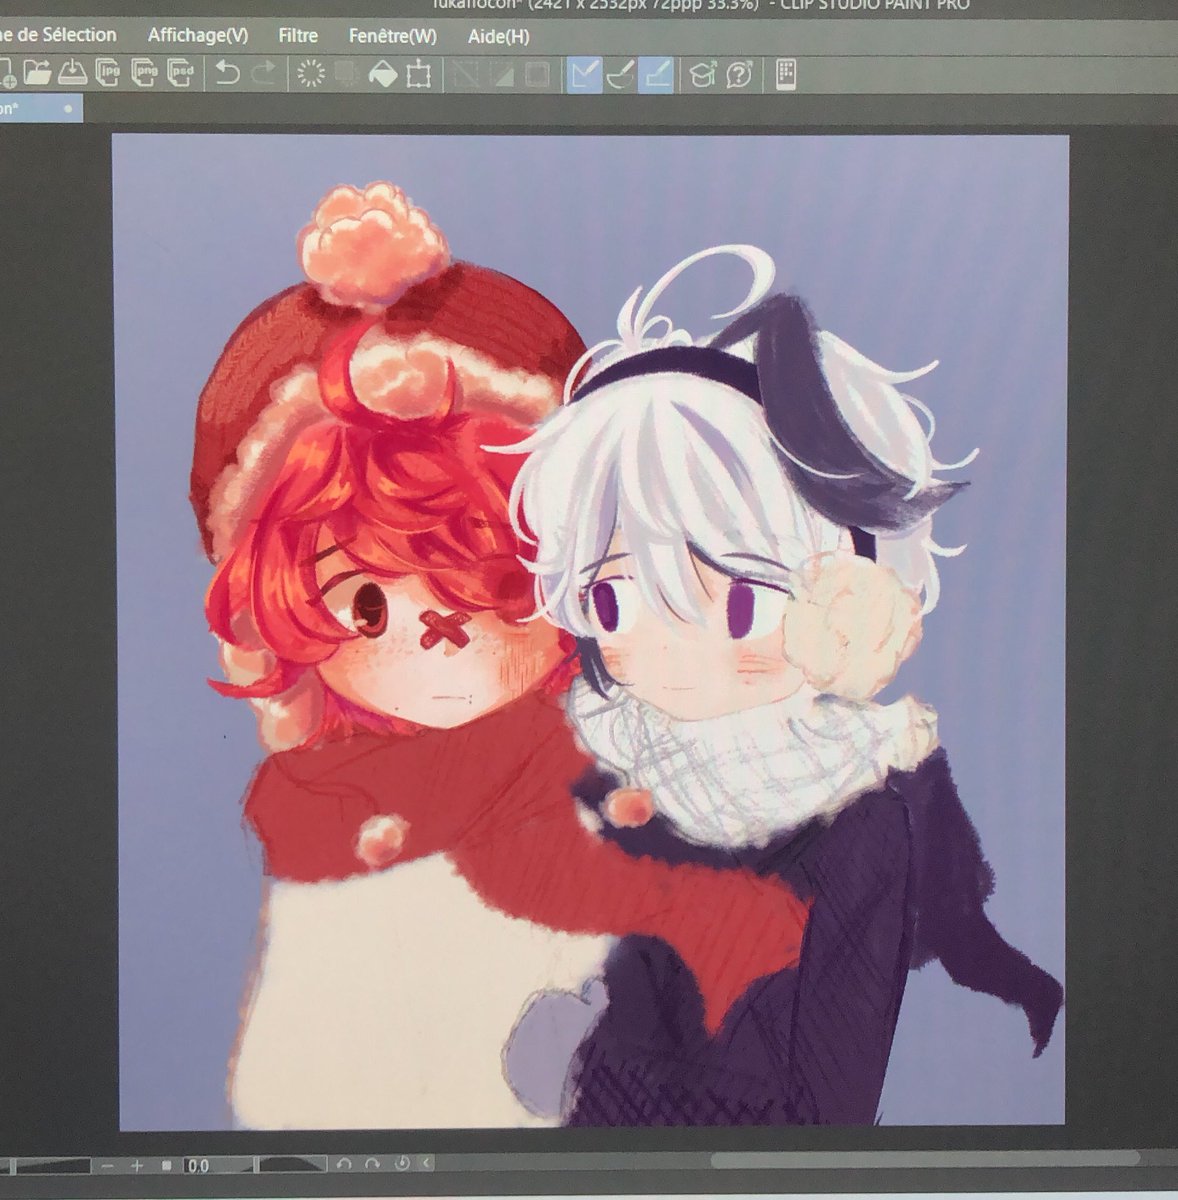 i love drawing on one single layer (wip) #fukaflower